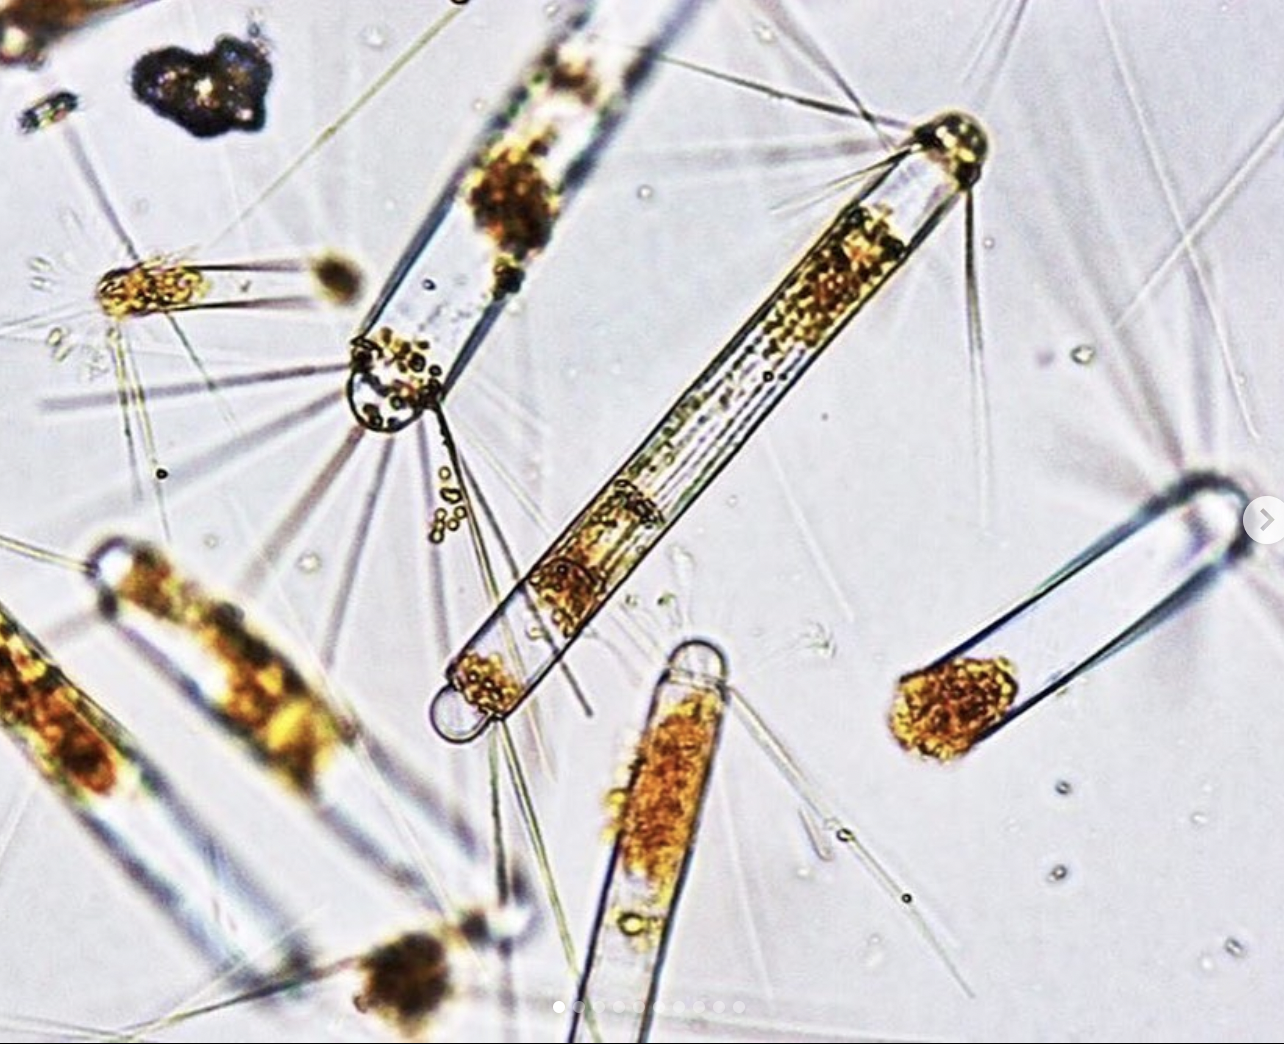 Image shows several clear, skinny cylinders with spikes radiating from either end. Each cylinder contains one or more areas of irregular, brown-gold material. As is typical of images made through a microscope, only a narrow plane in the image is in focus, with objects nearer or farther from the plane appearing out of focus.